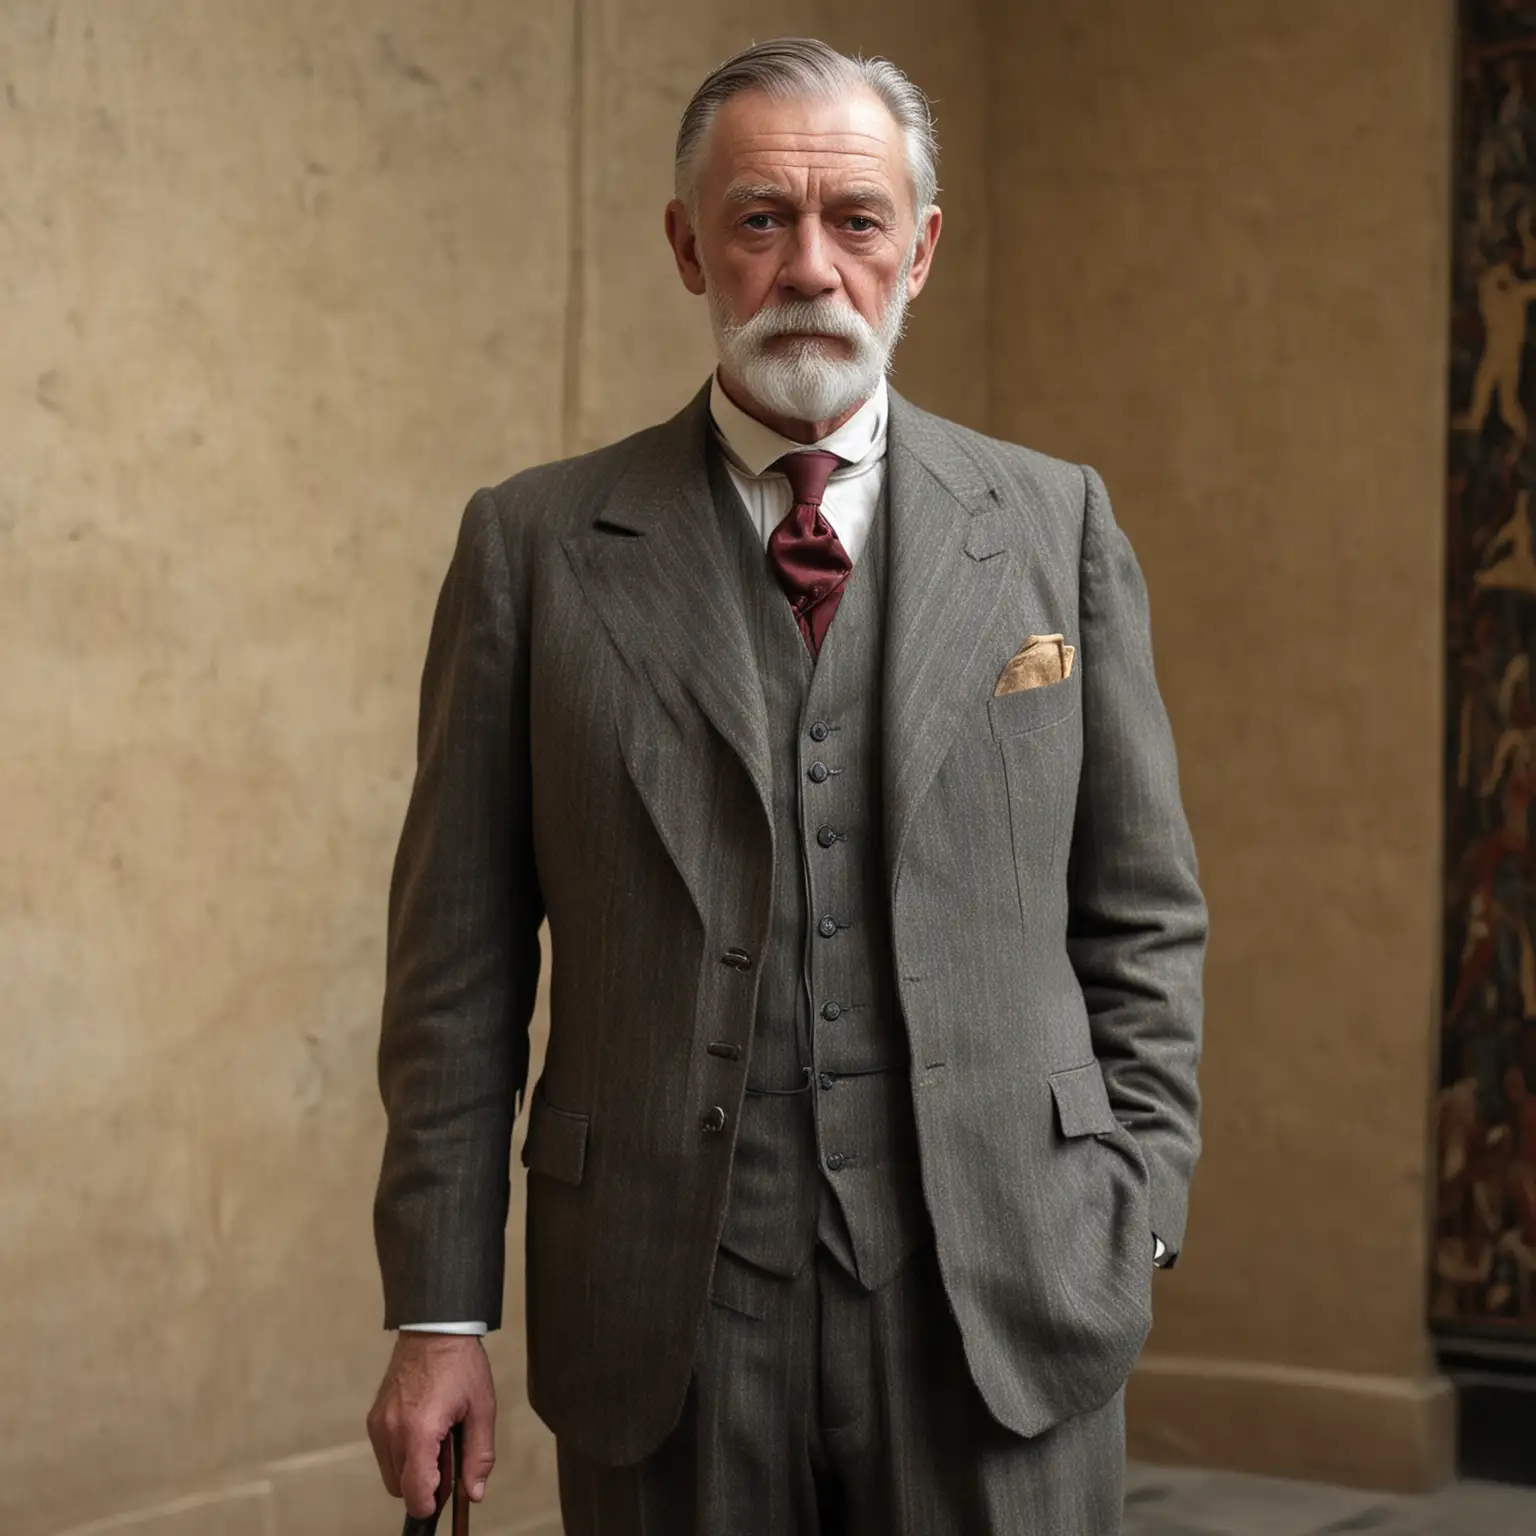 Full colour image. A British gentleman of the 1920s. He is wearing an expensive well tailored suit but is very thin. He has a neat close cropped beard, sallow cheeks and sunken eyes. He has a haunted and sad expression on his face. He is in his 50s but looks older. He walks with a single cane. He is standing in the lobby of an Egyptology museum.